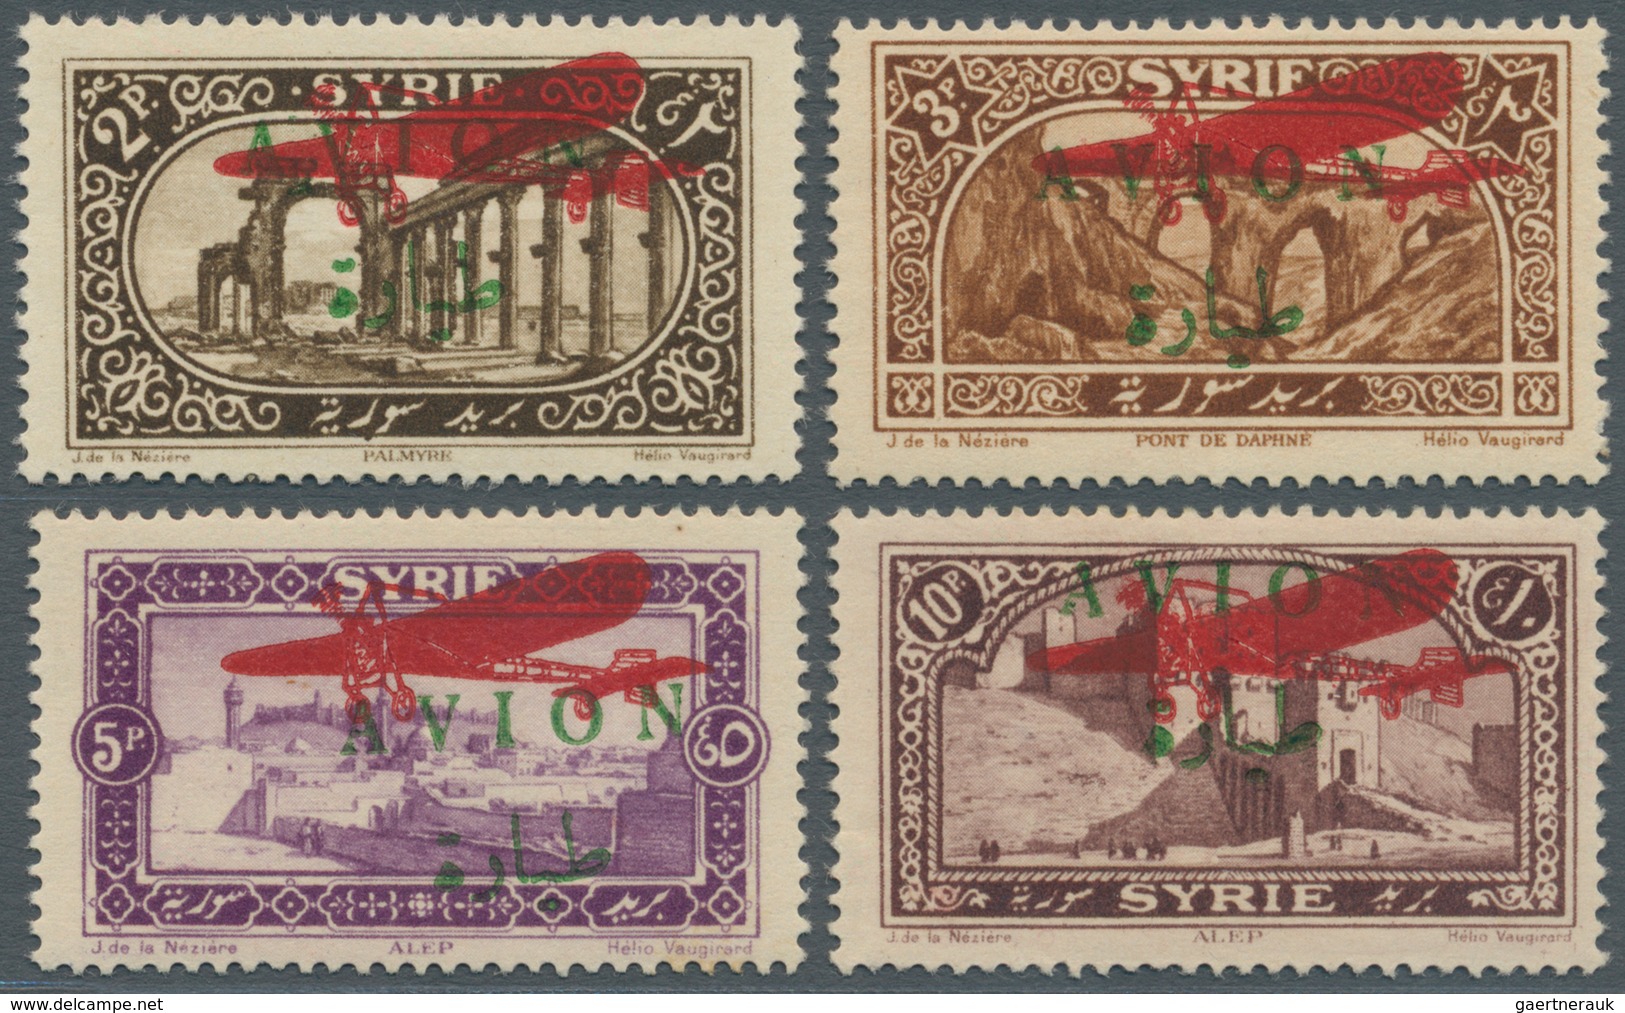 Syrien: 1925, Airmails, Red "Plane" Surcharge On Green "AVION" Oveprints, Not Issued, Complete Set O - Syrie